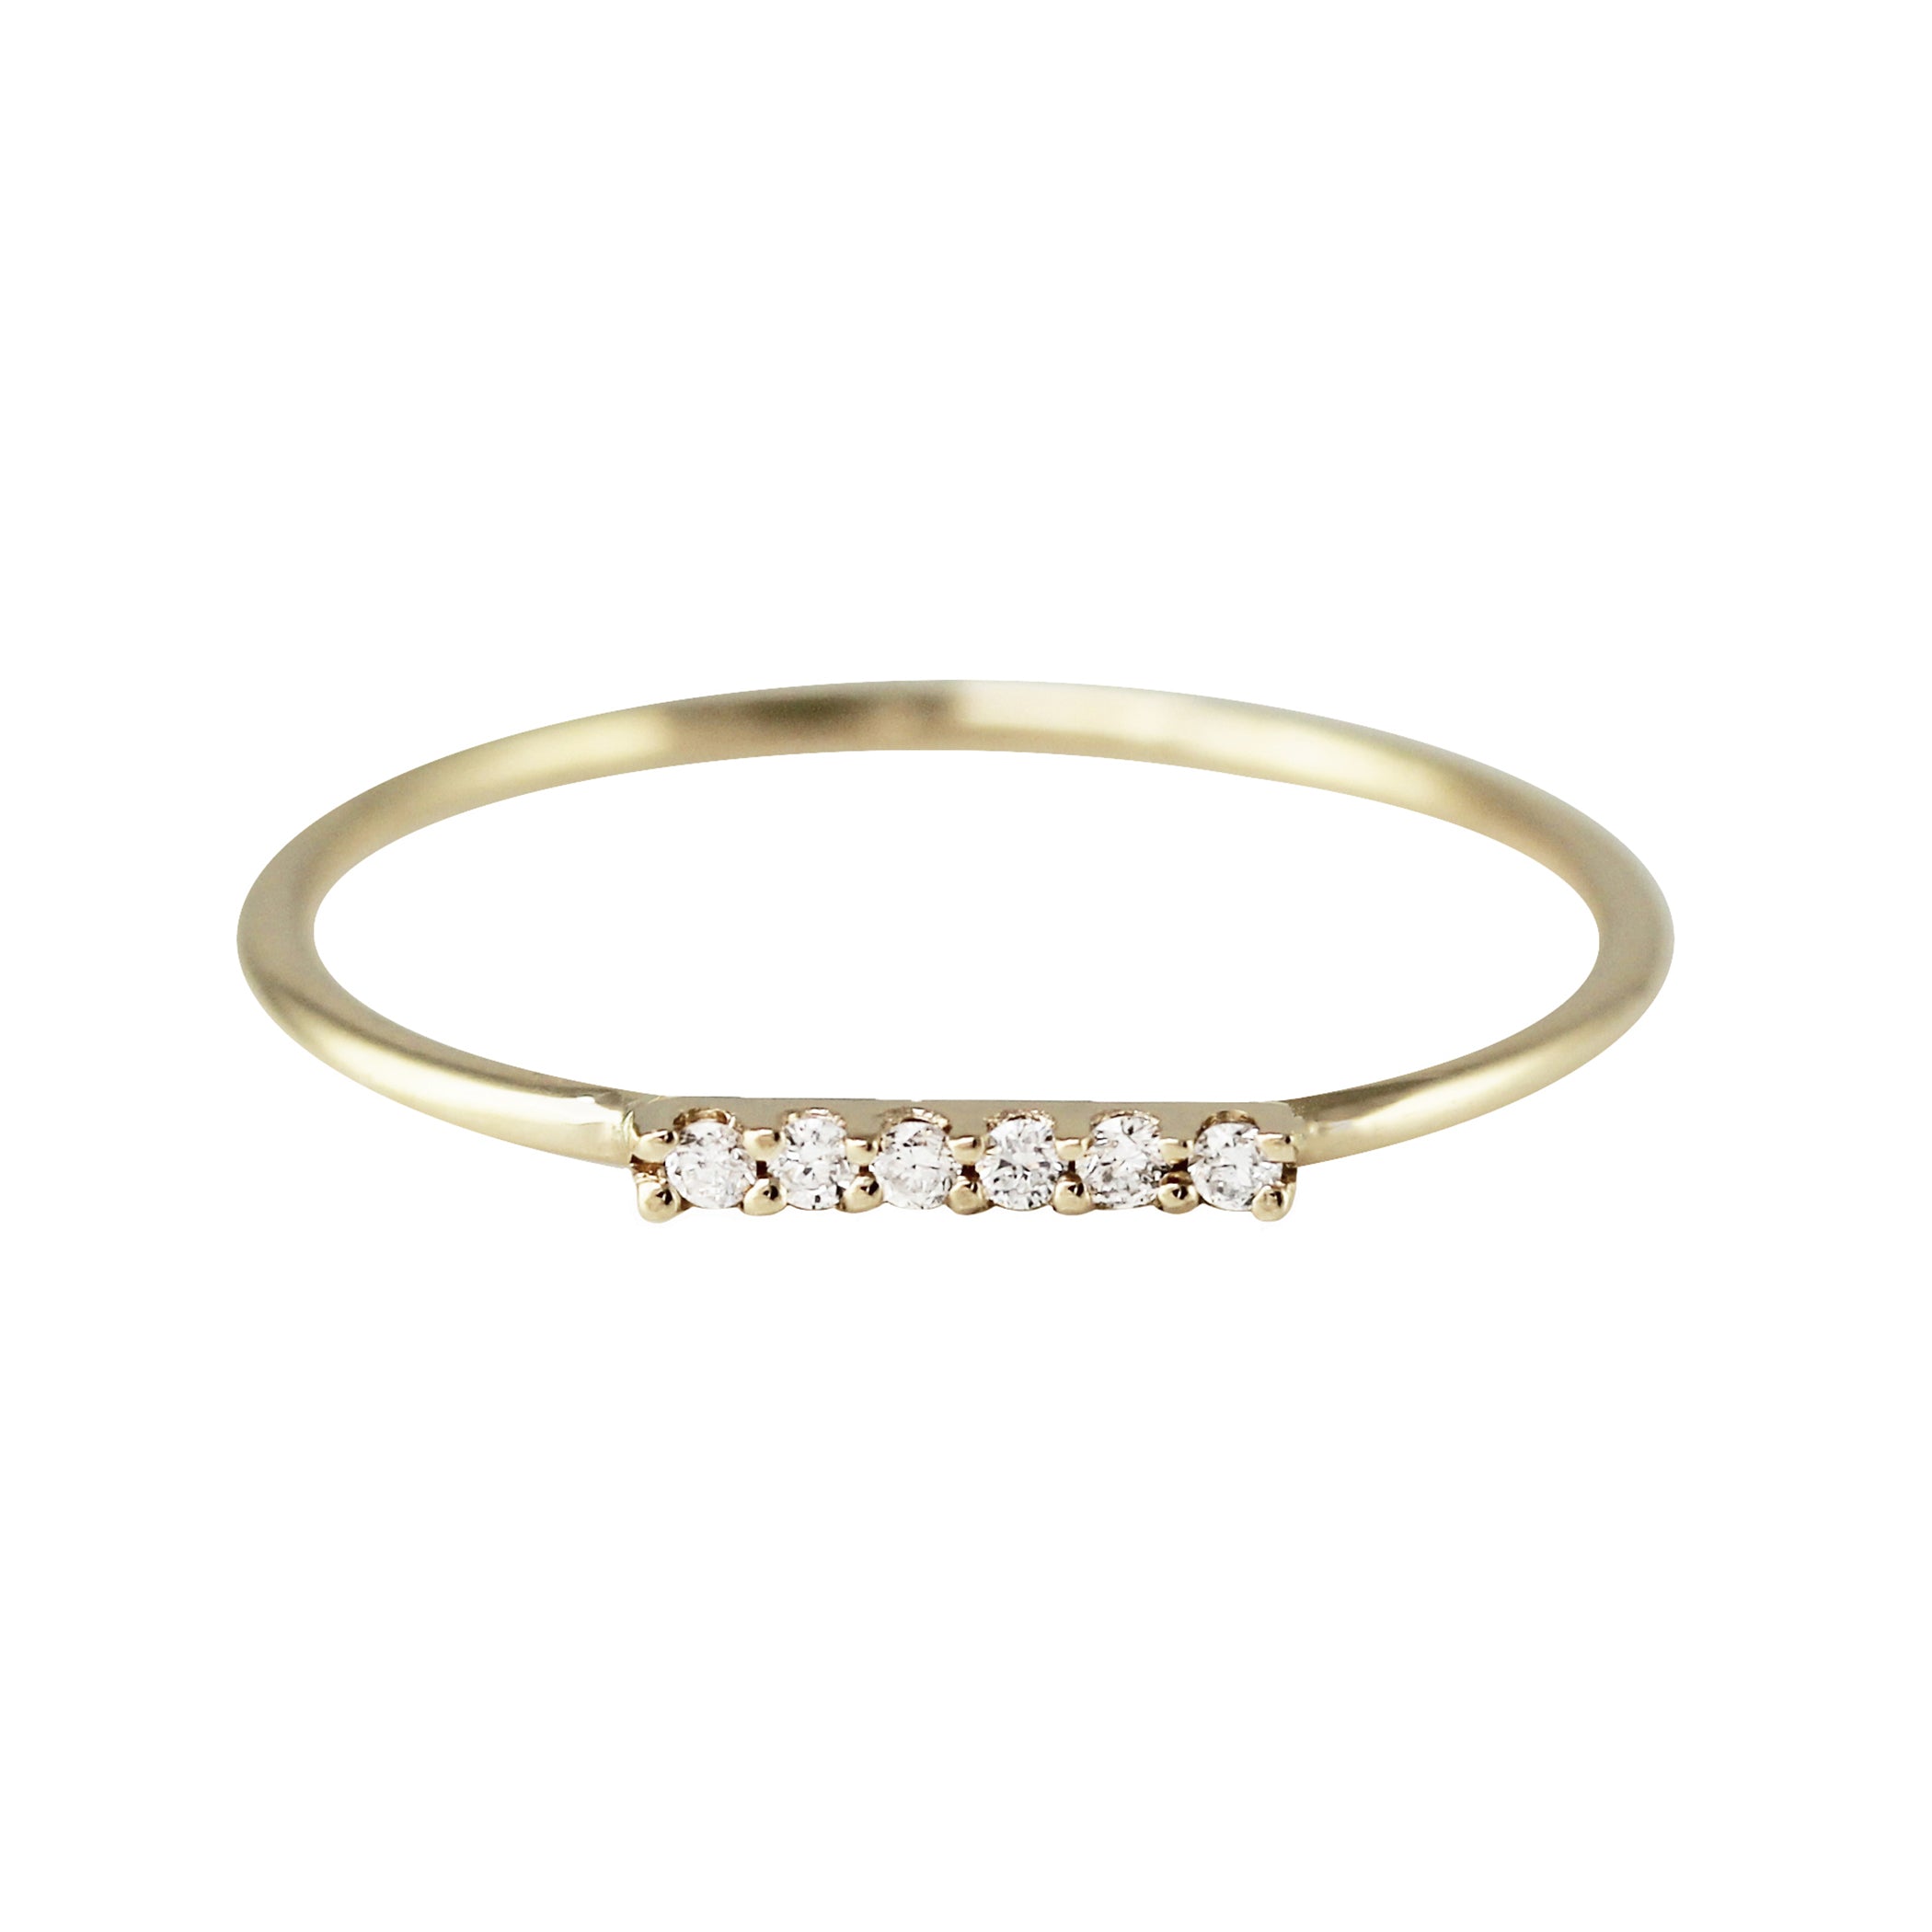 14K BAR ON TOP WITH DIAMONDS RING